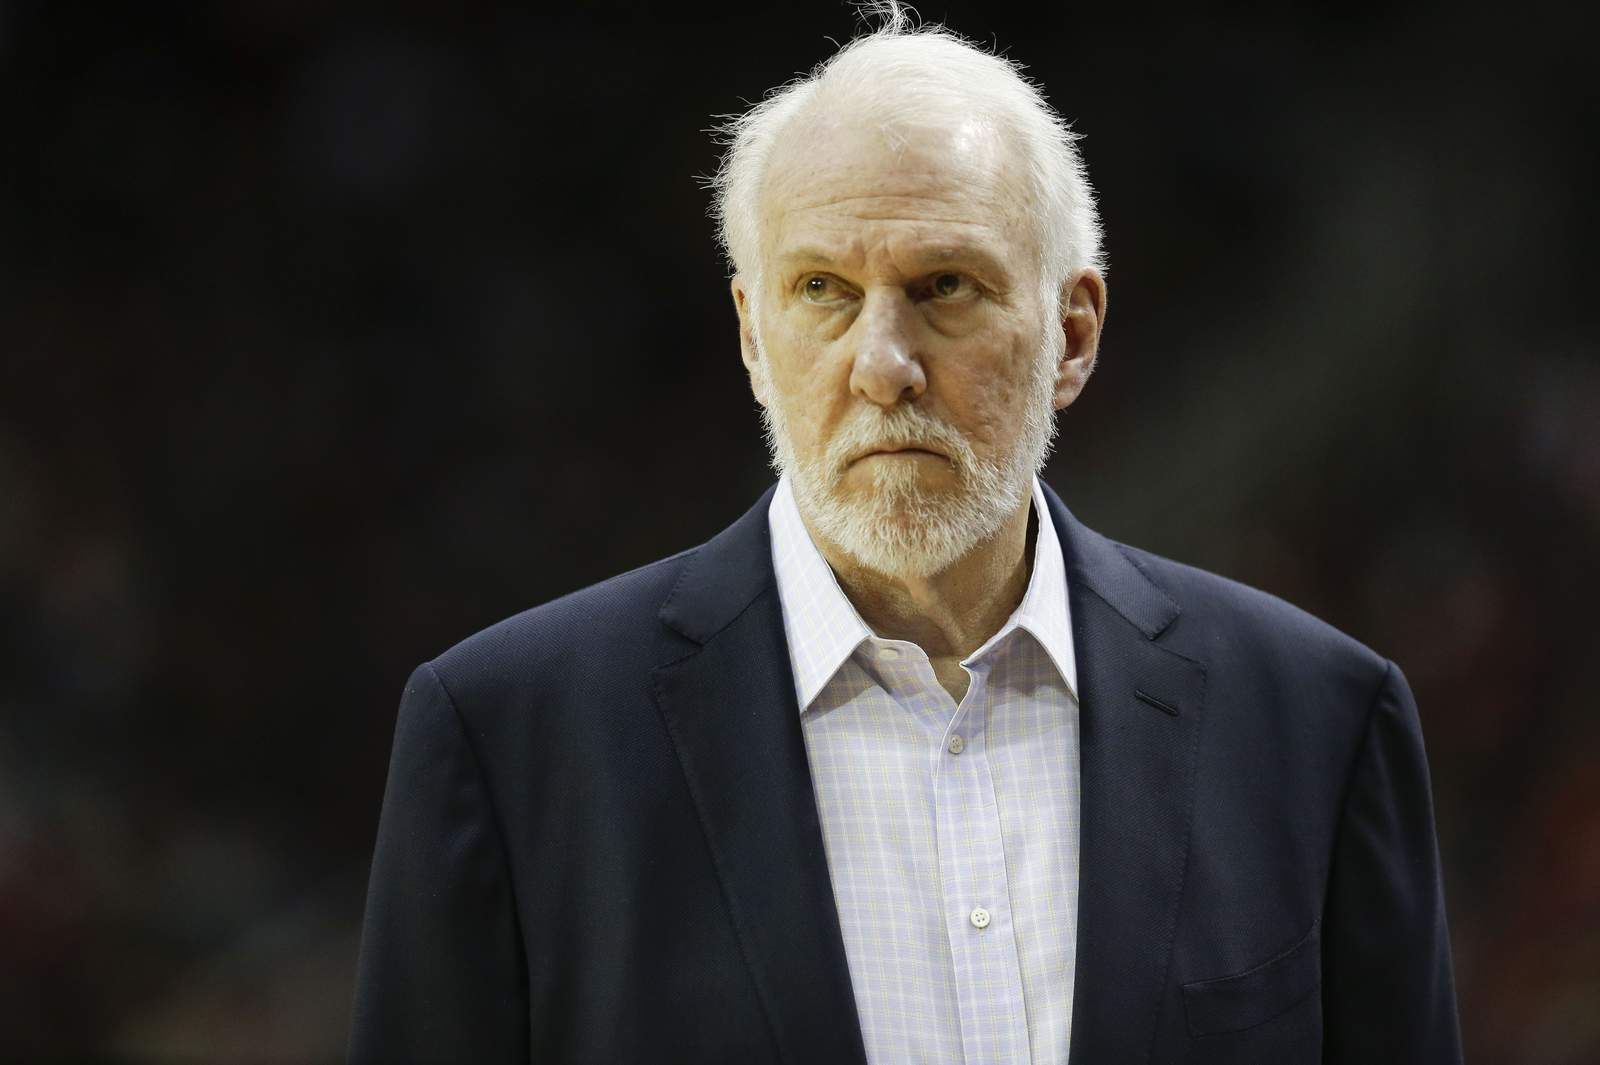 ‘I’m just embarrassed as a white person:' Spurs Coach Gregg Popovich says about George Floyd’s death